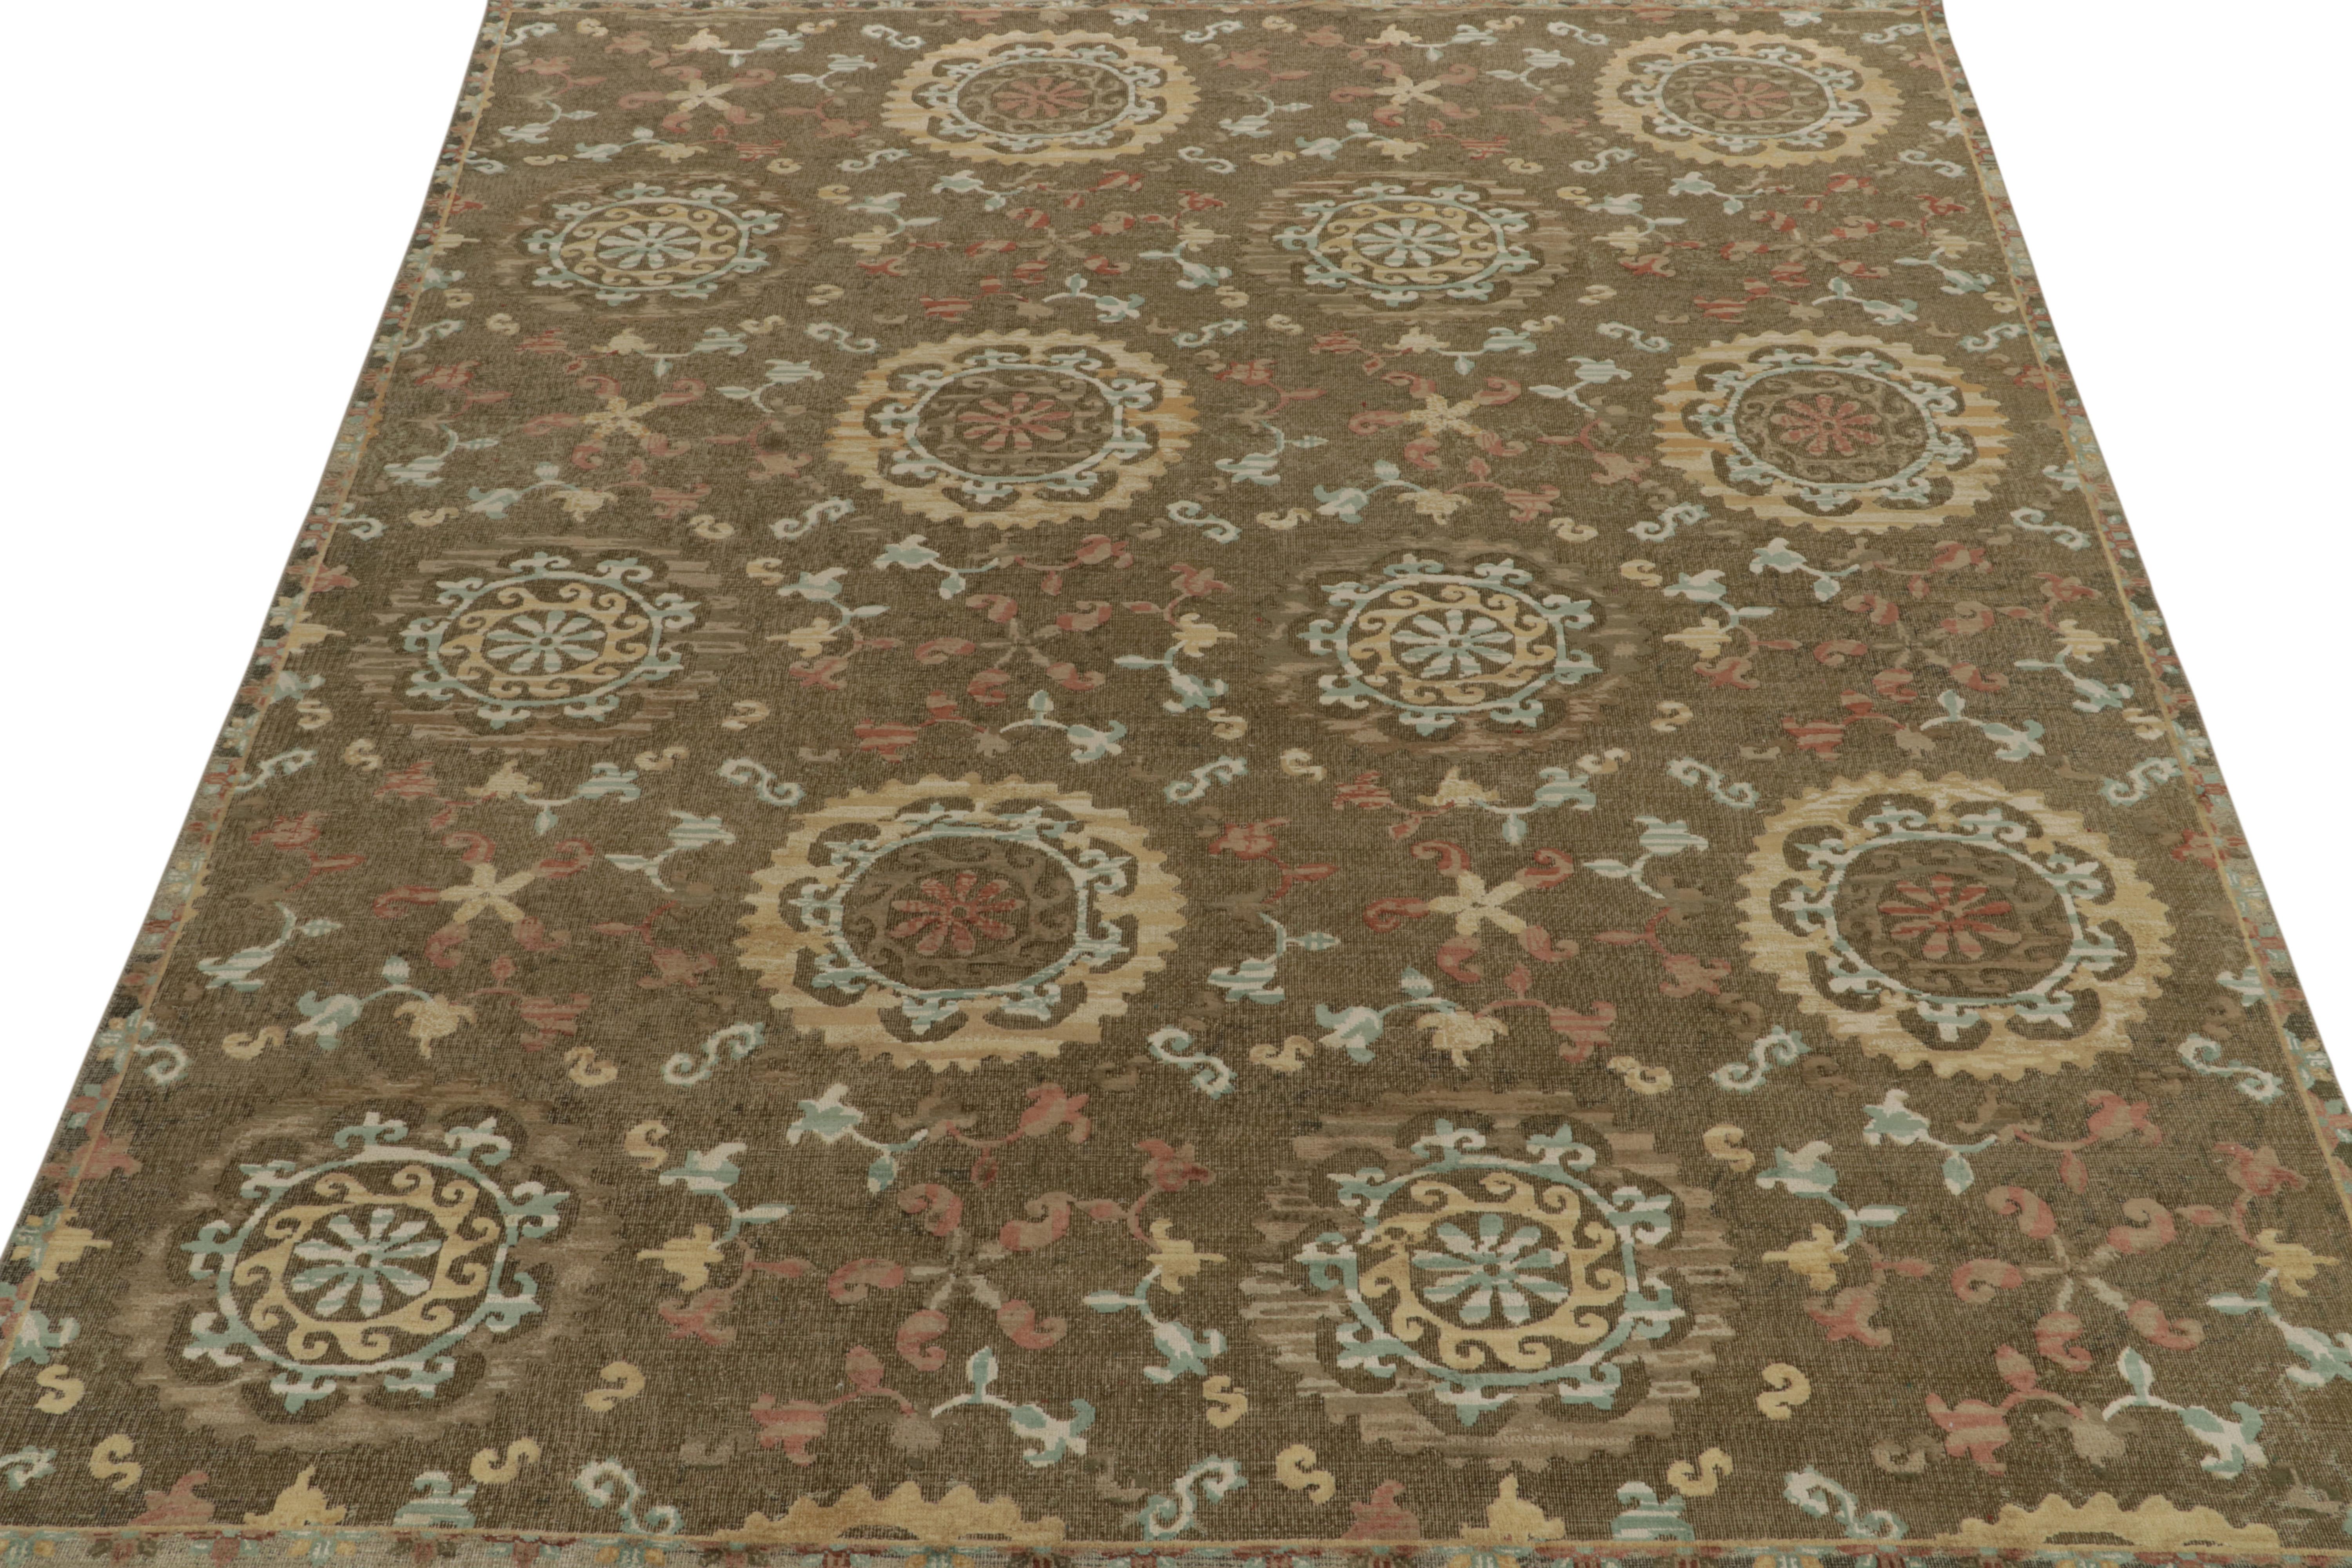 Tabriz Rug & Kilim’s Classic Spanish Style Rug in Beige-Brown, Gold & Blue Medallions For Sale